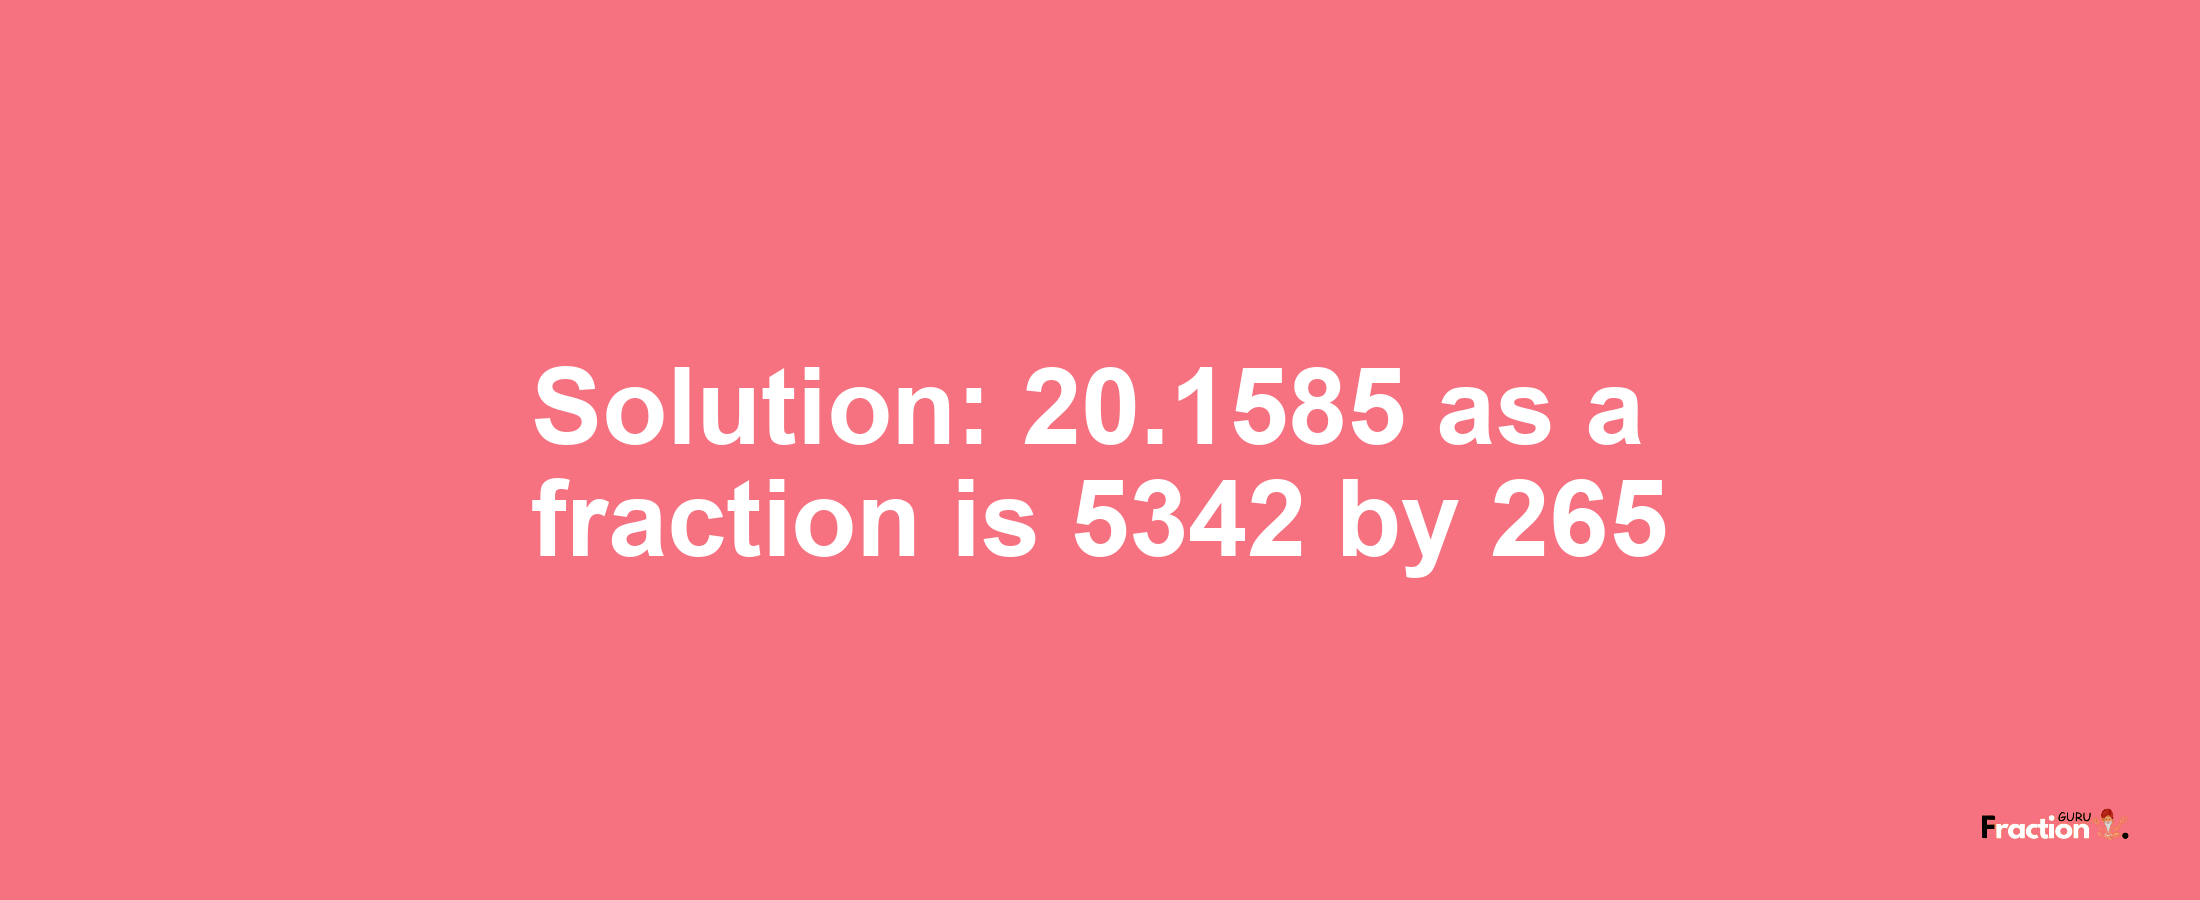 Solution:20.1585 as a fraction is 5342/265